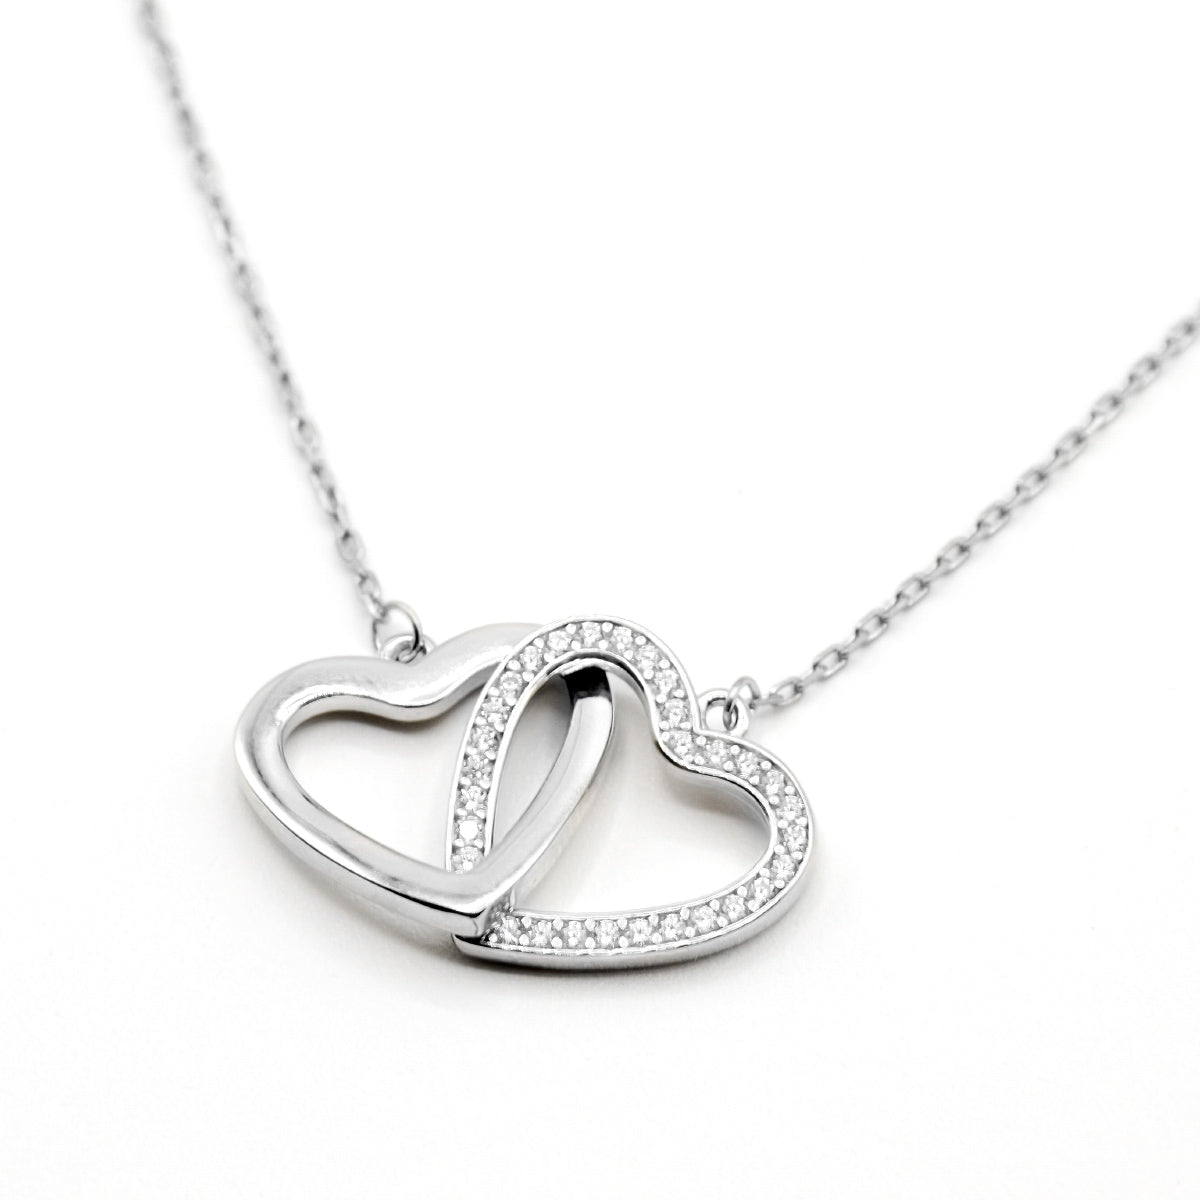 Bestie Noun - Sterling Silver Joined Hearts Necklace Gift Set